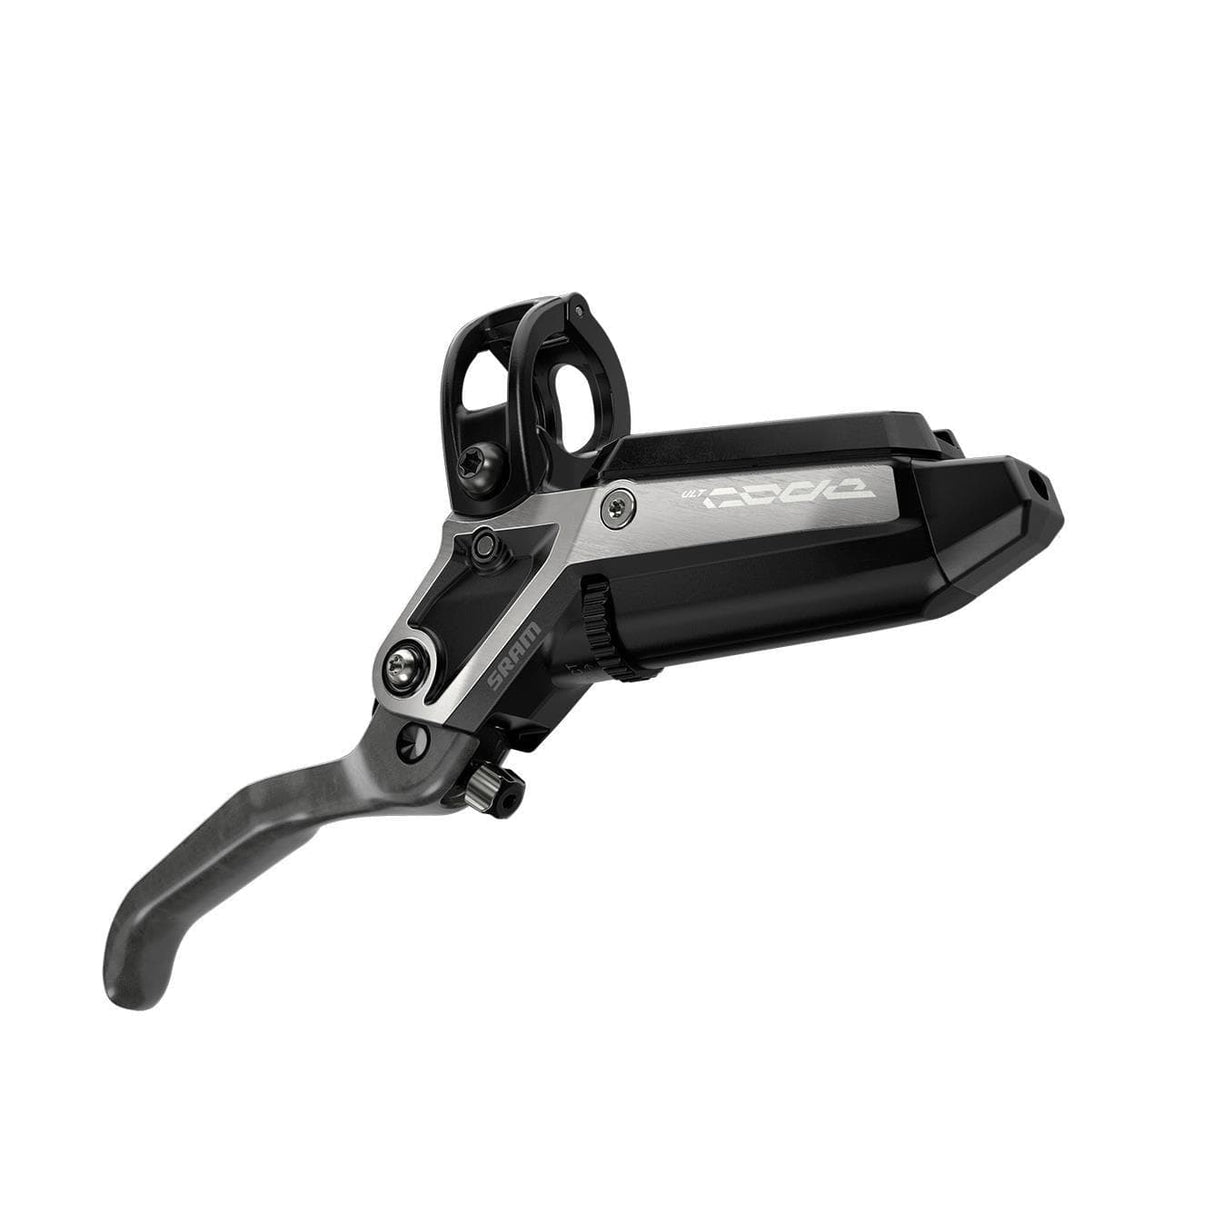 Sram Disc Brake Code Ultimate Stealth - Carbon Lever, Ti Hardware, Reach/Contact Adj ,Swinglink, Front Hose (Includes Mmx Clamp, Rotor/Bracket Sold Separately) C1: Black Ano 950Mm